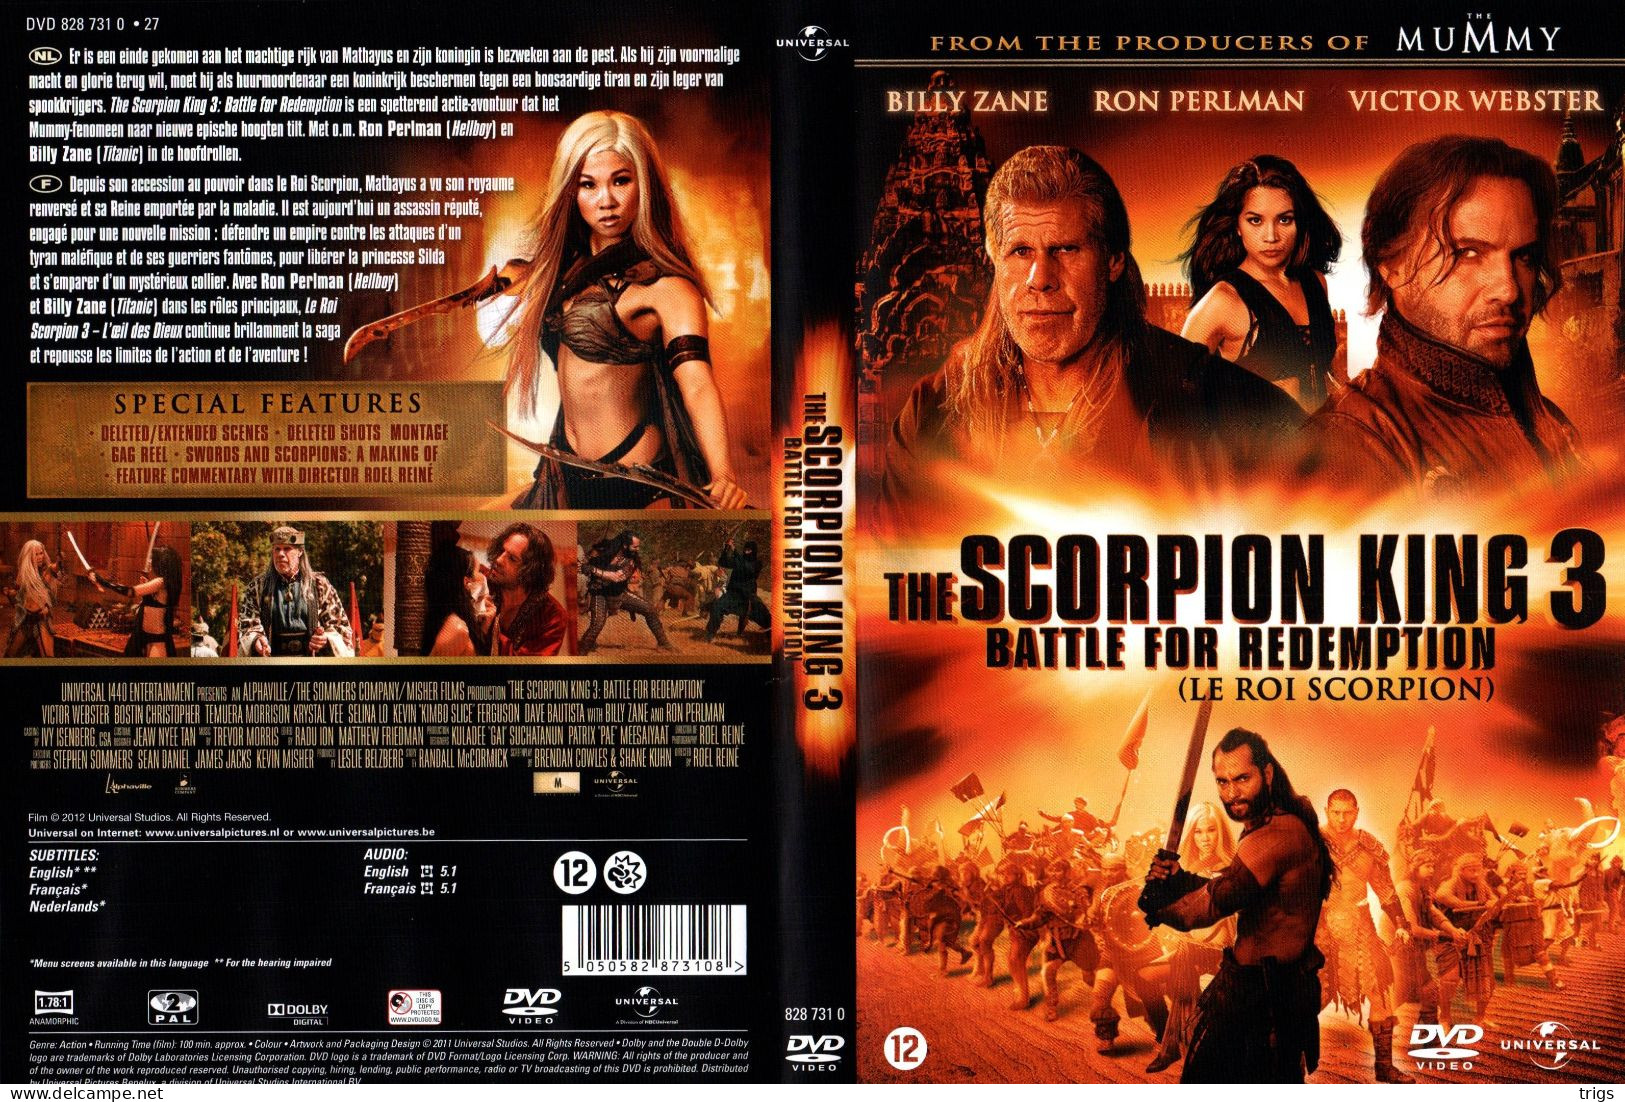 DVD - The Scorpion King 3: Battle For Redemption - Action, Adventure